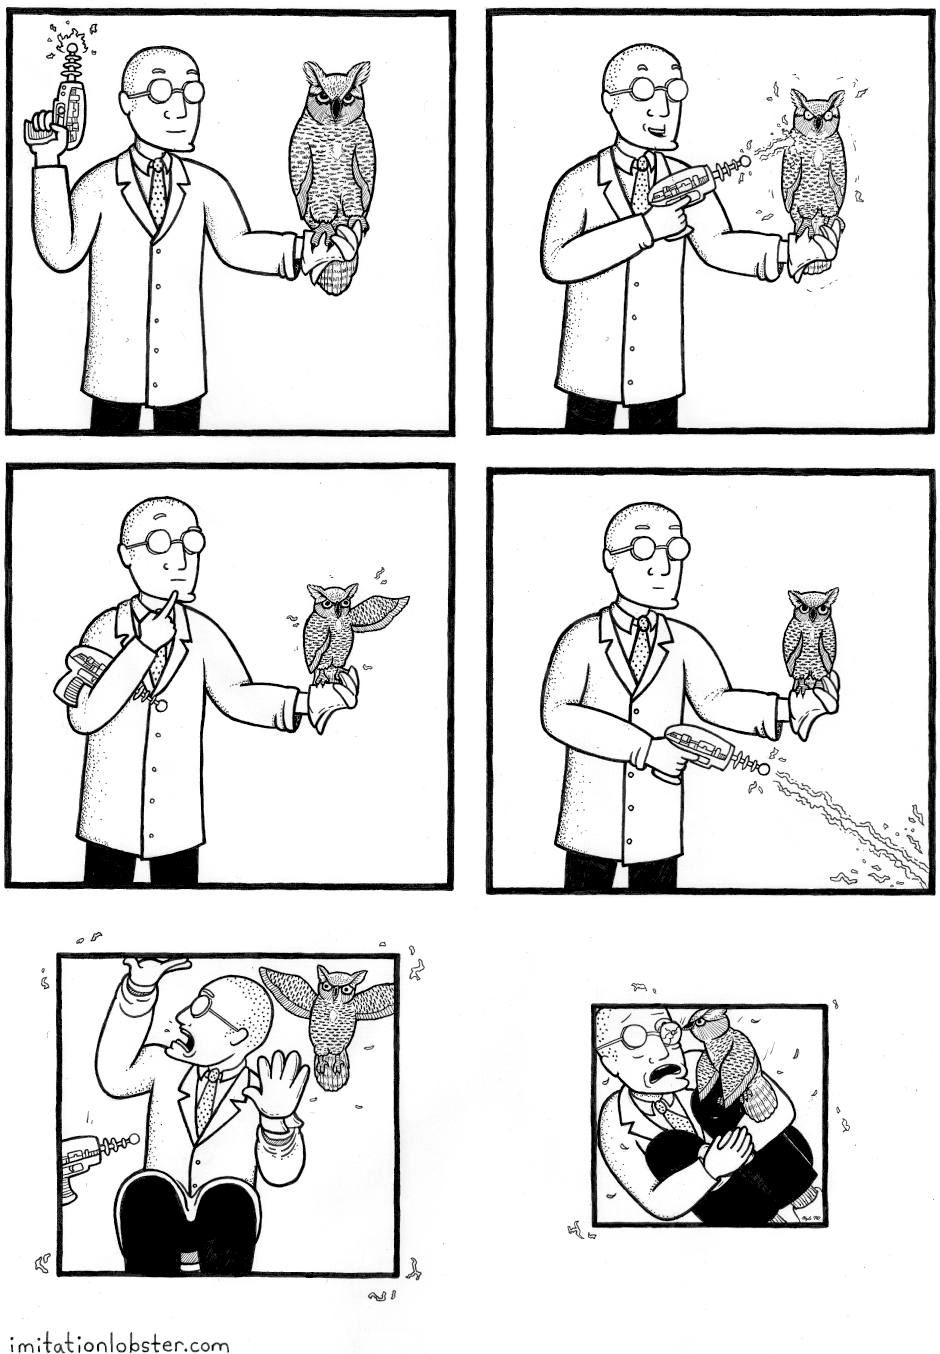 Be careful with the Reducer! - Comics, Scientists, , Frame, Imitationlobster